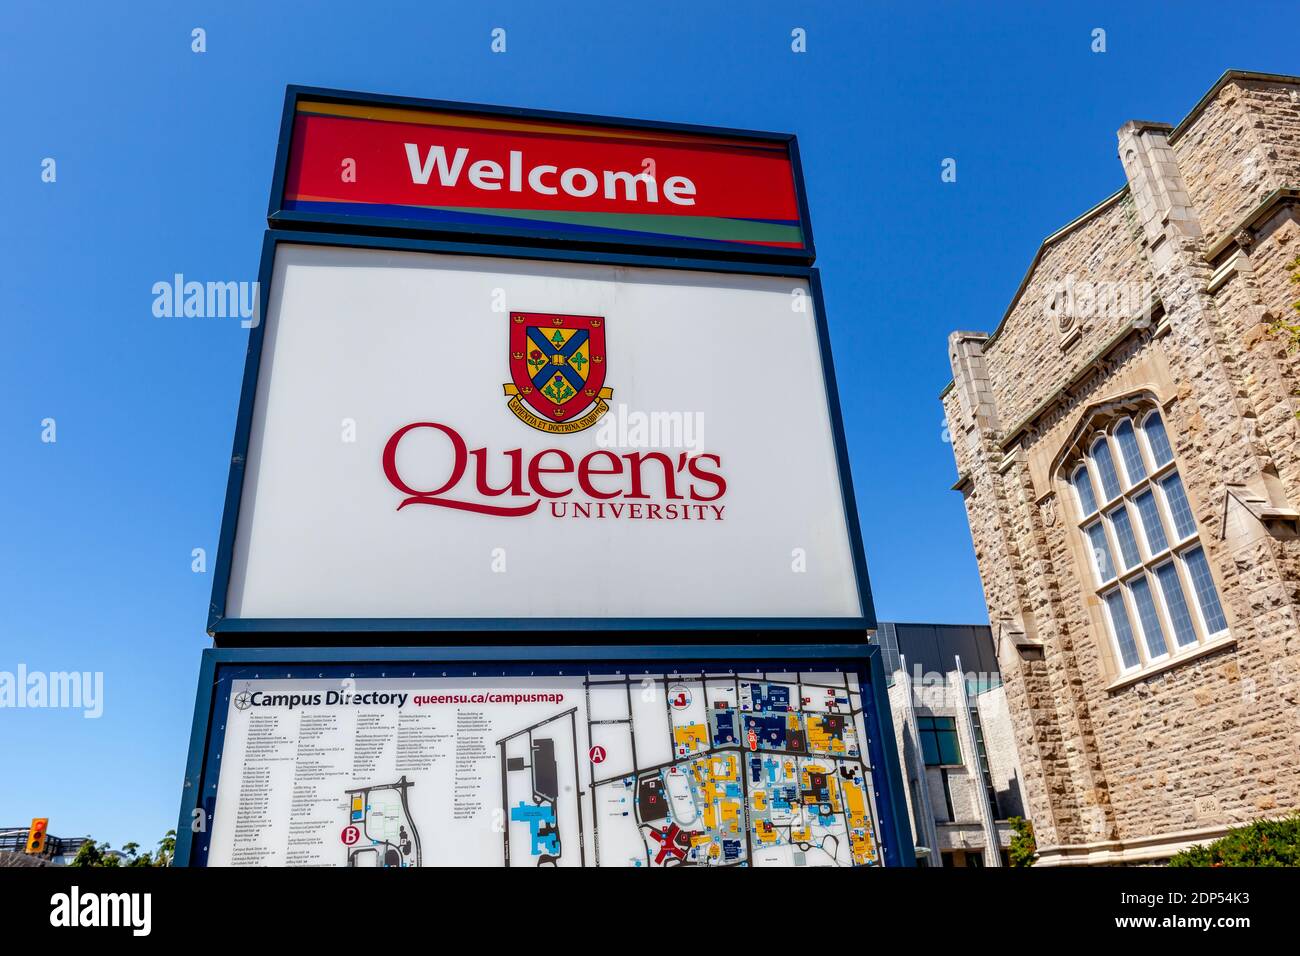 Kingston, Ontario, Canada - August 7, 2020: Queen's University sign is seen at the campus in Kingston, Ontario, Canada Stock Photo